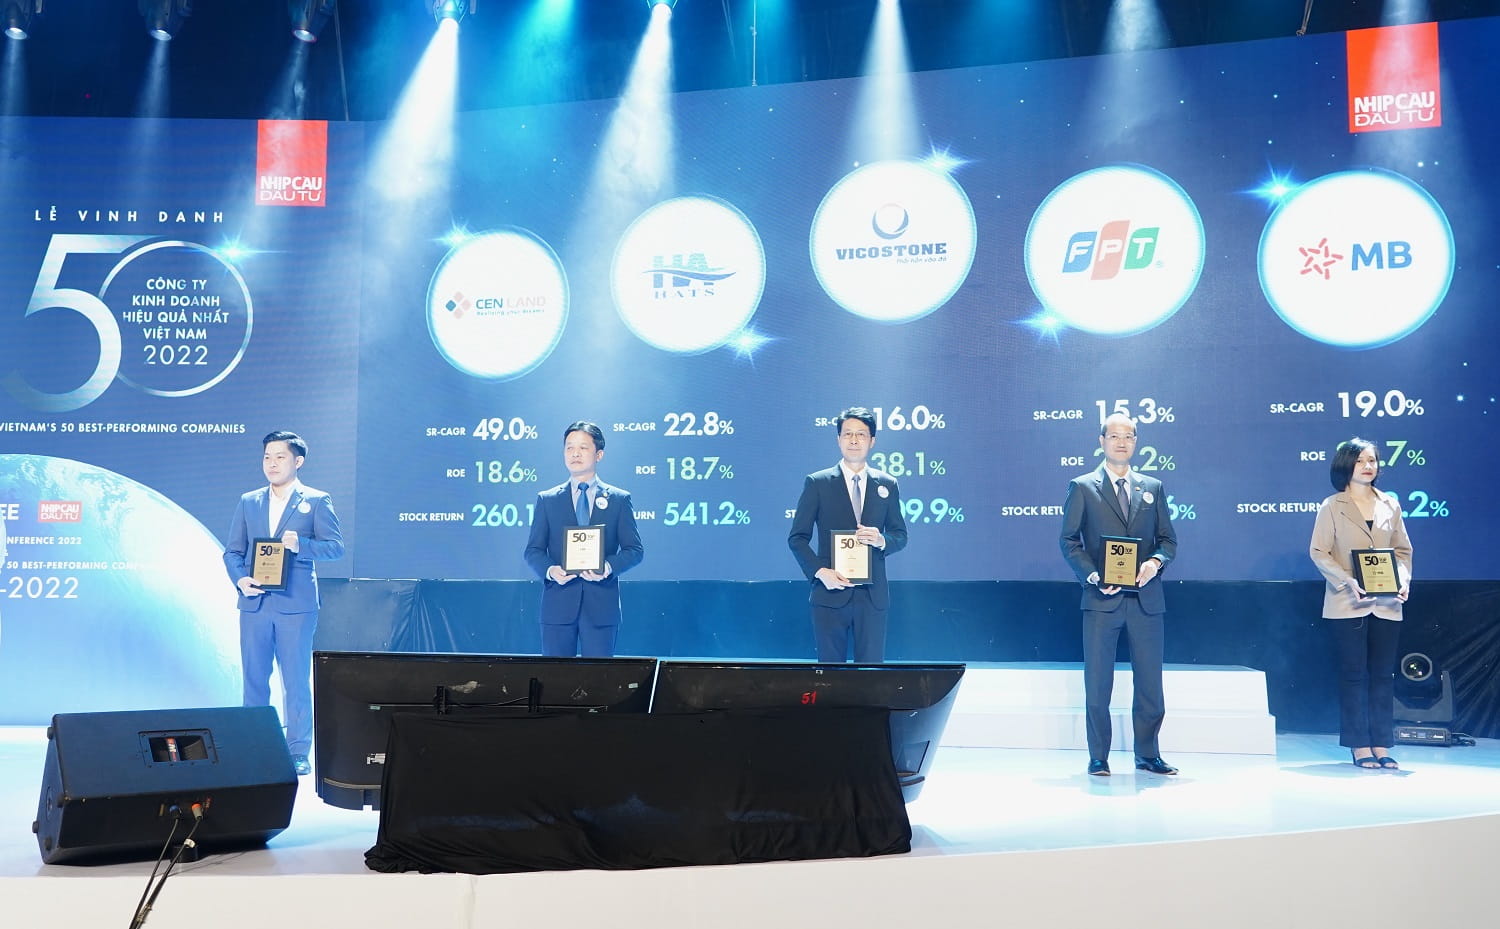 According to the Organizers, the enterprises have made it that far and significantly contributed to the robust growth of the Vietnamese economy.